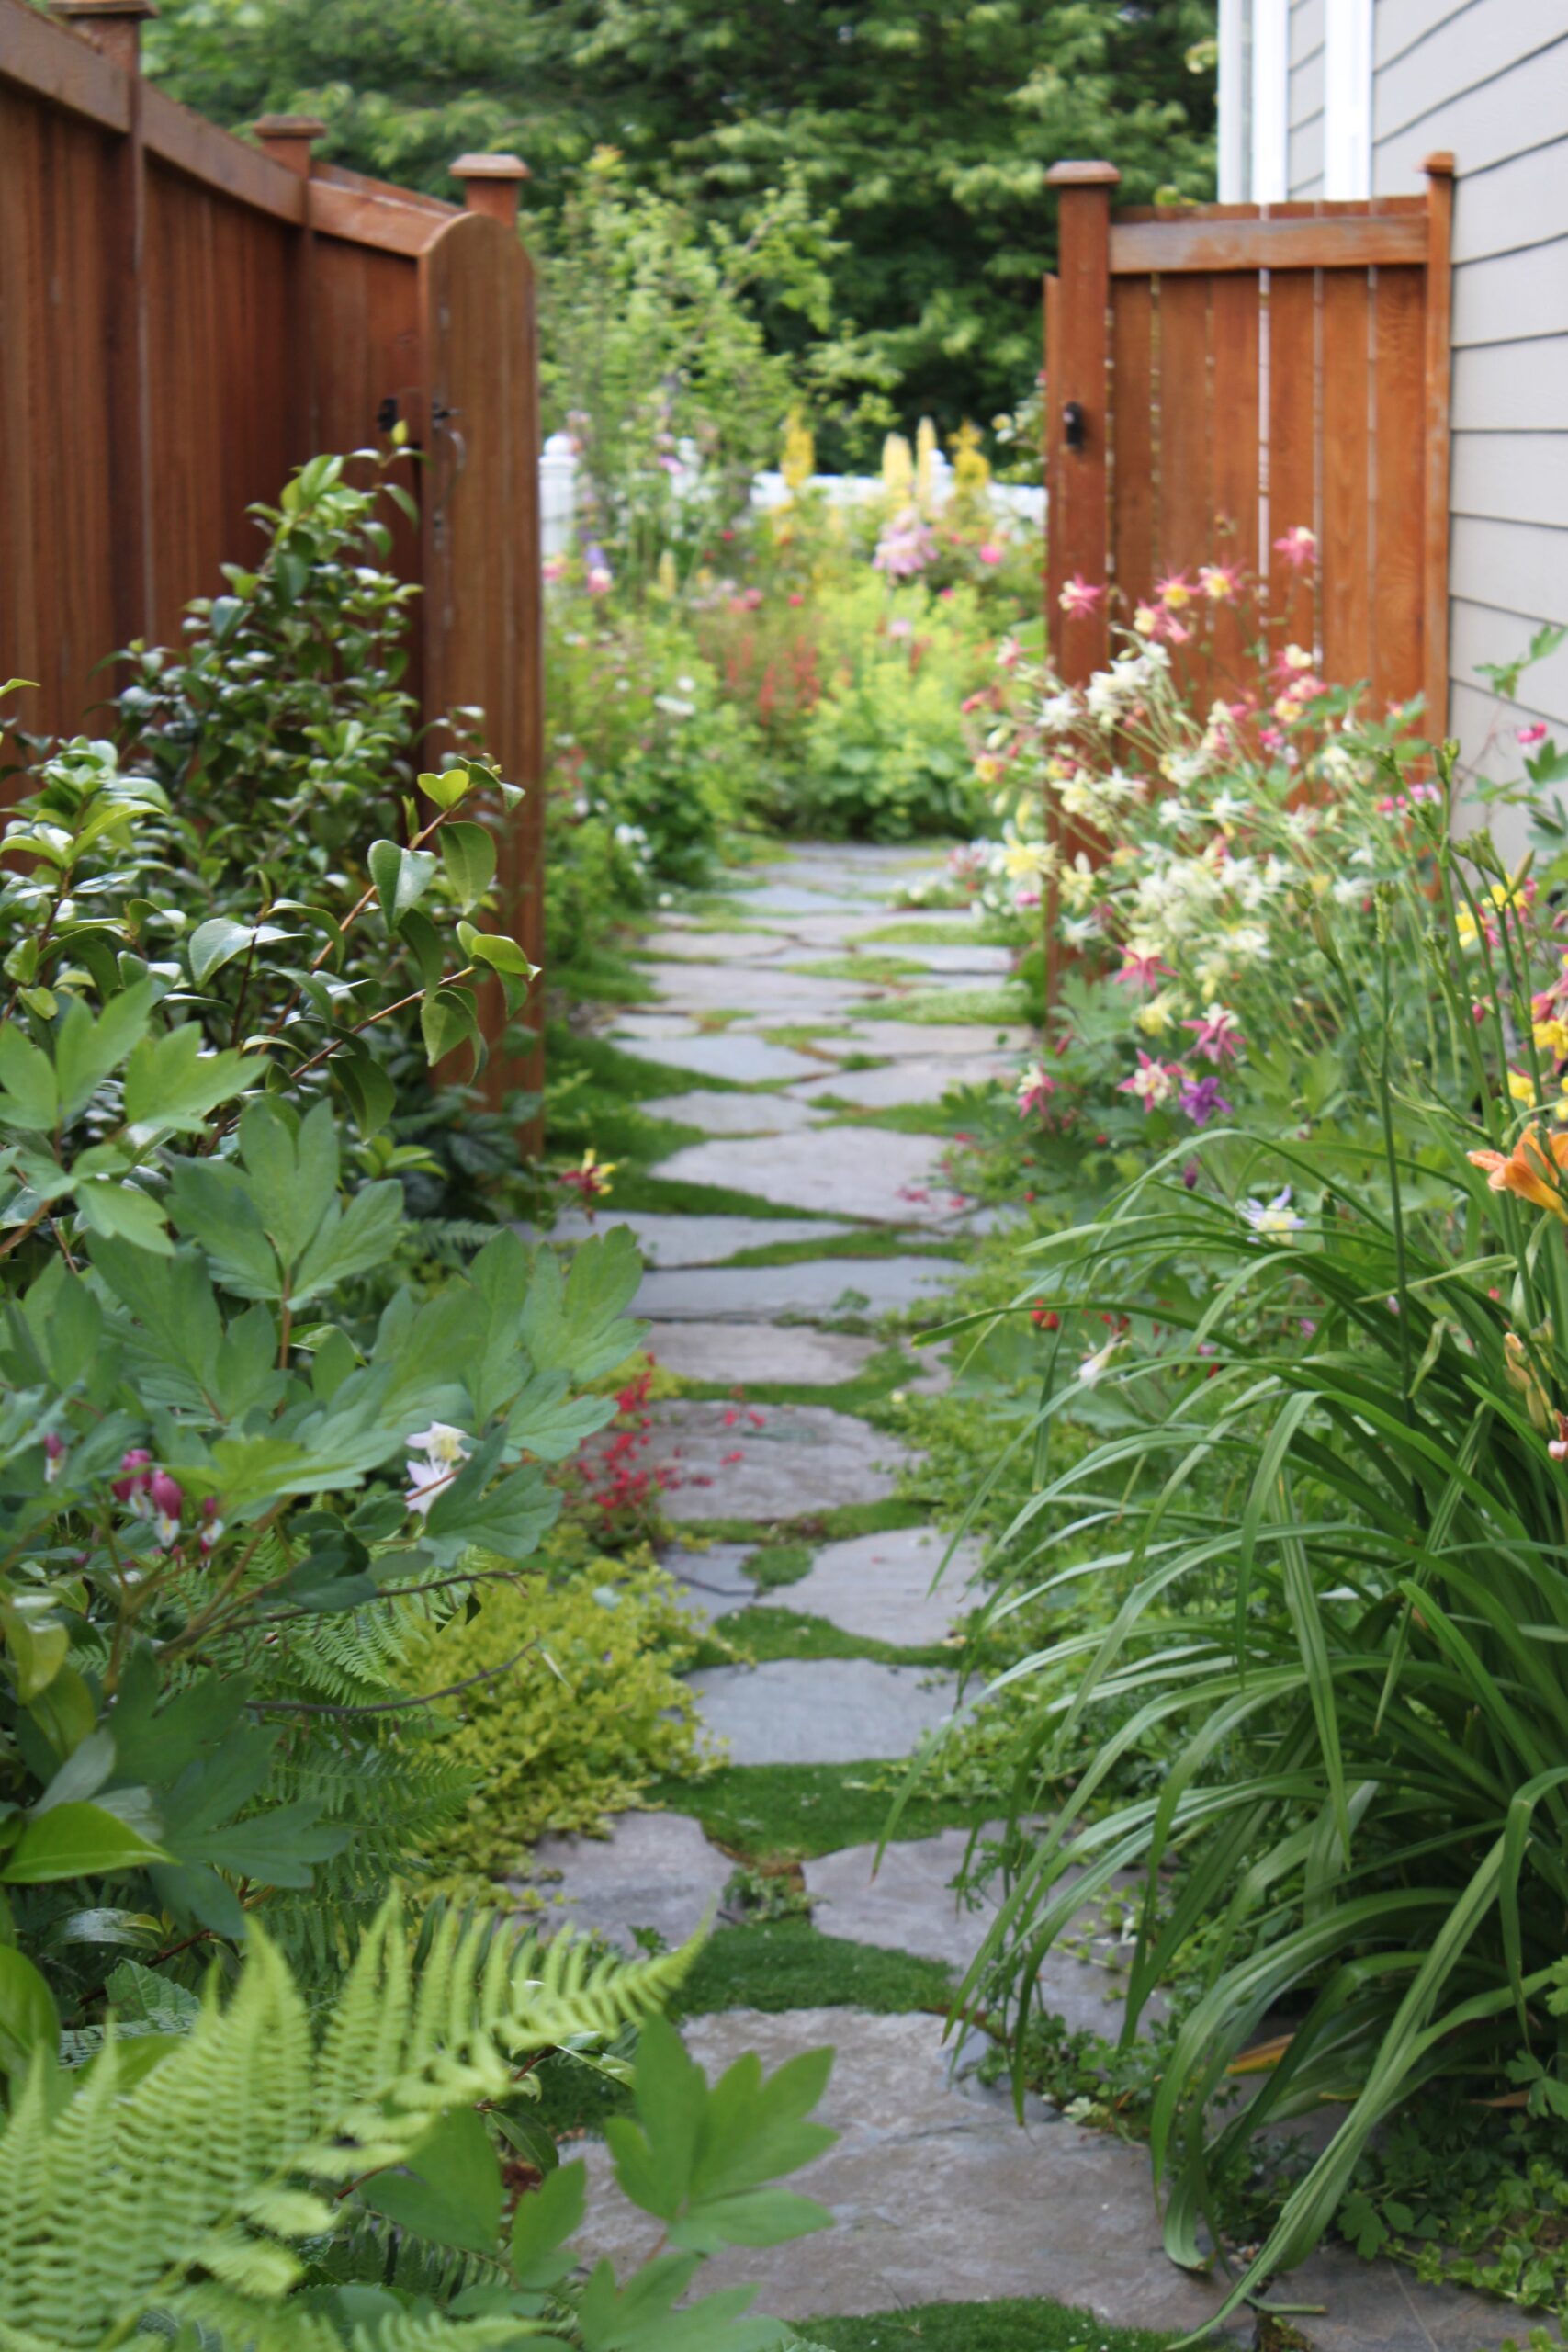 Enhancing Your Outdoor Space: Ideas for
Beautiful Garden Paths